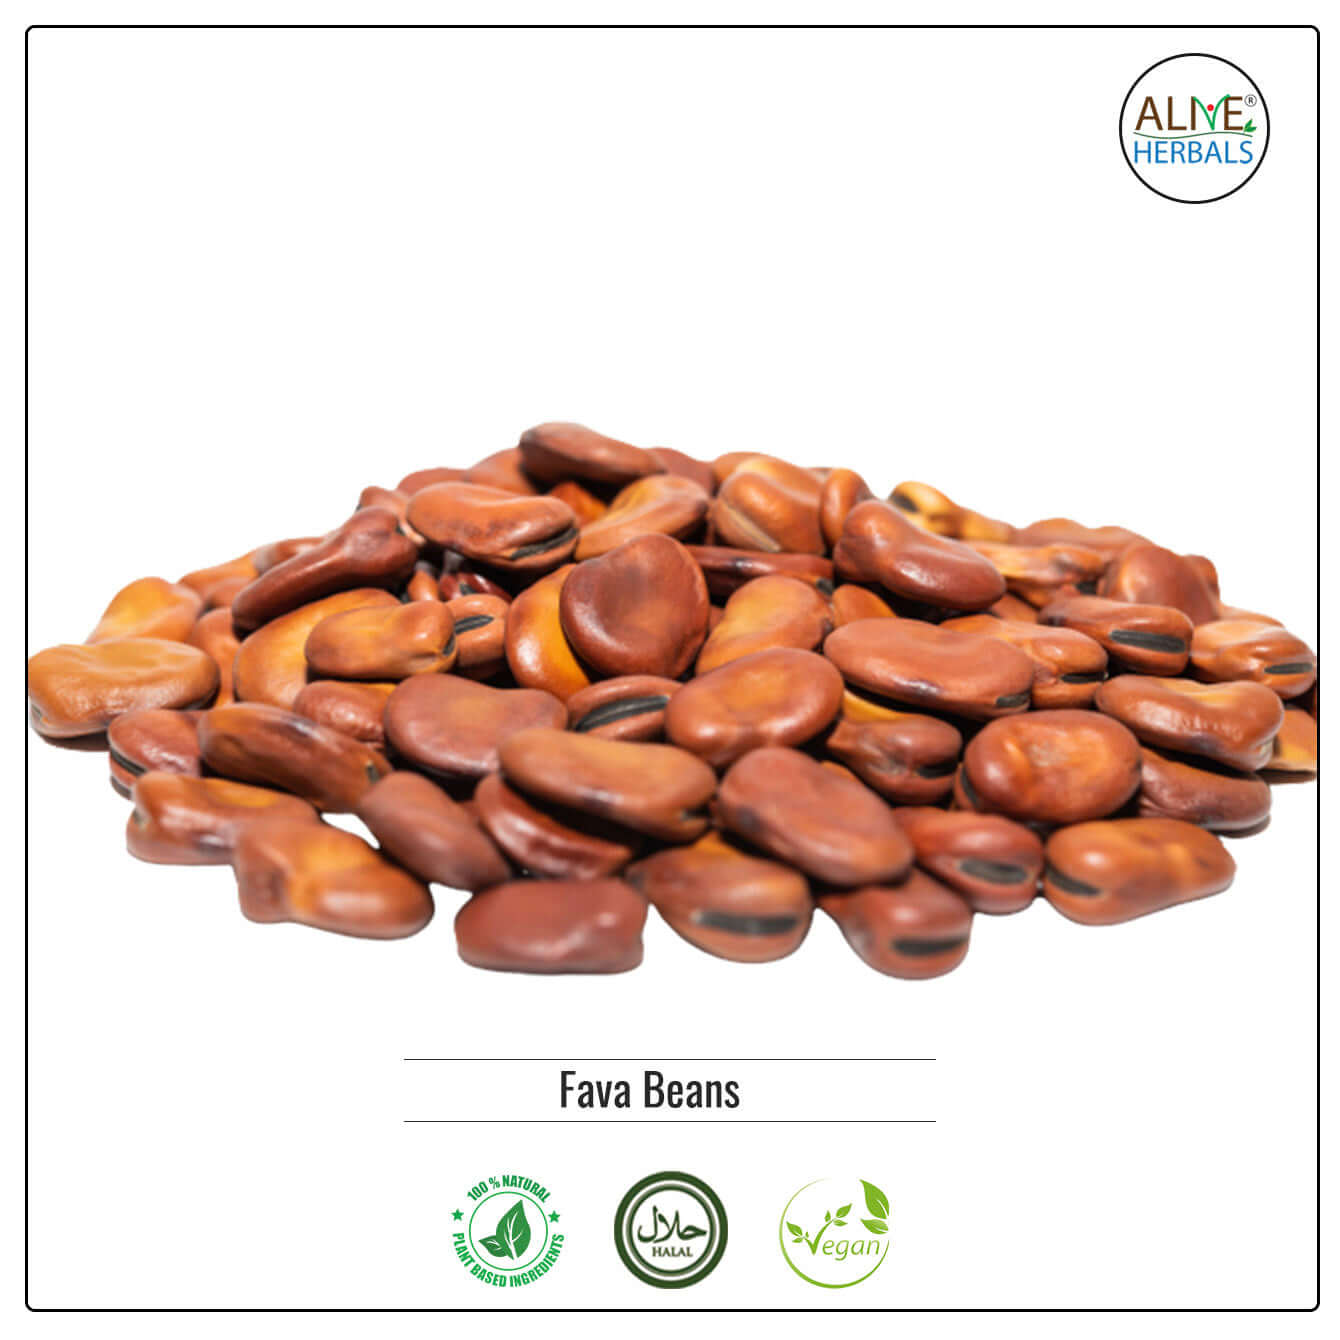 Fava Beans -  Shop at Natural Food Store | Alive Herbals.